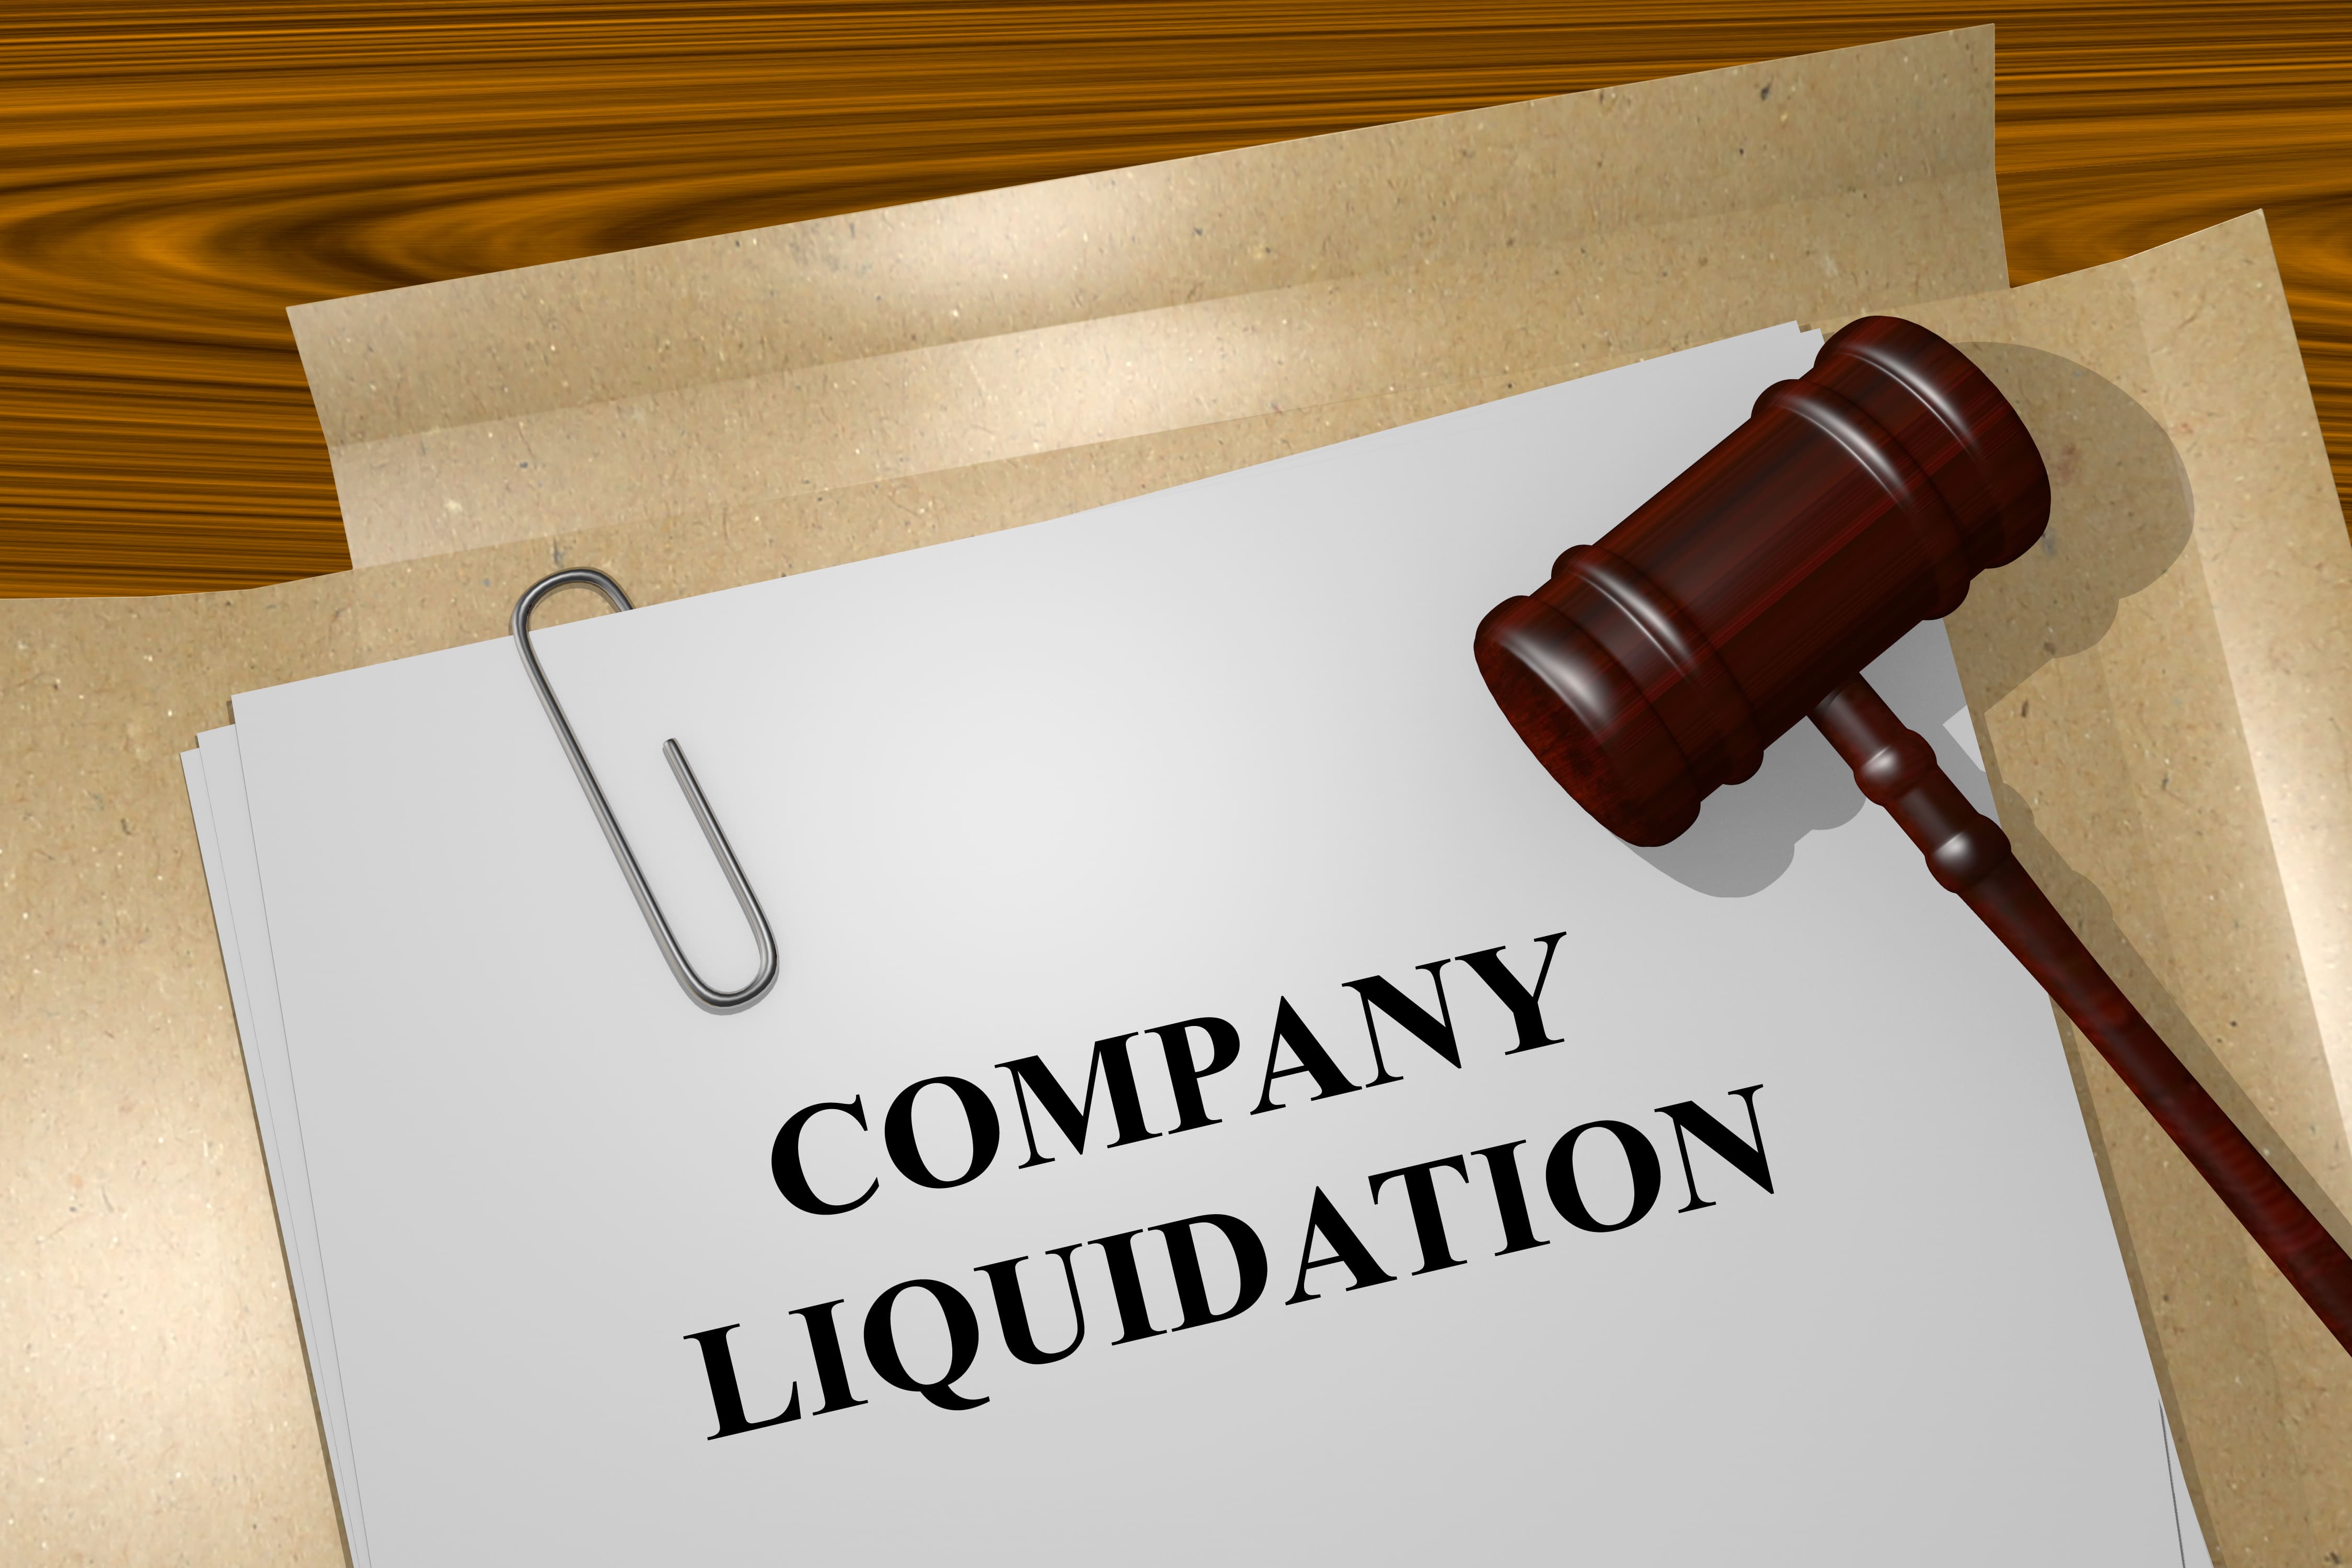 Member’s Voluntary Liquidation of Companies and Limited Liability Partnerships in Kenya.